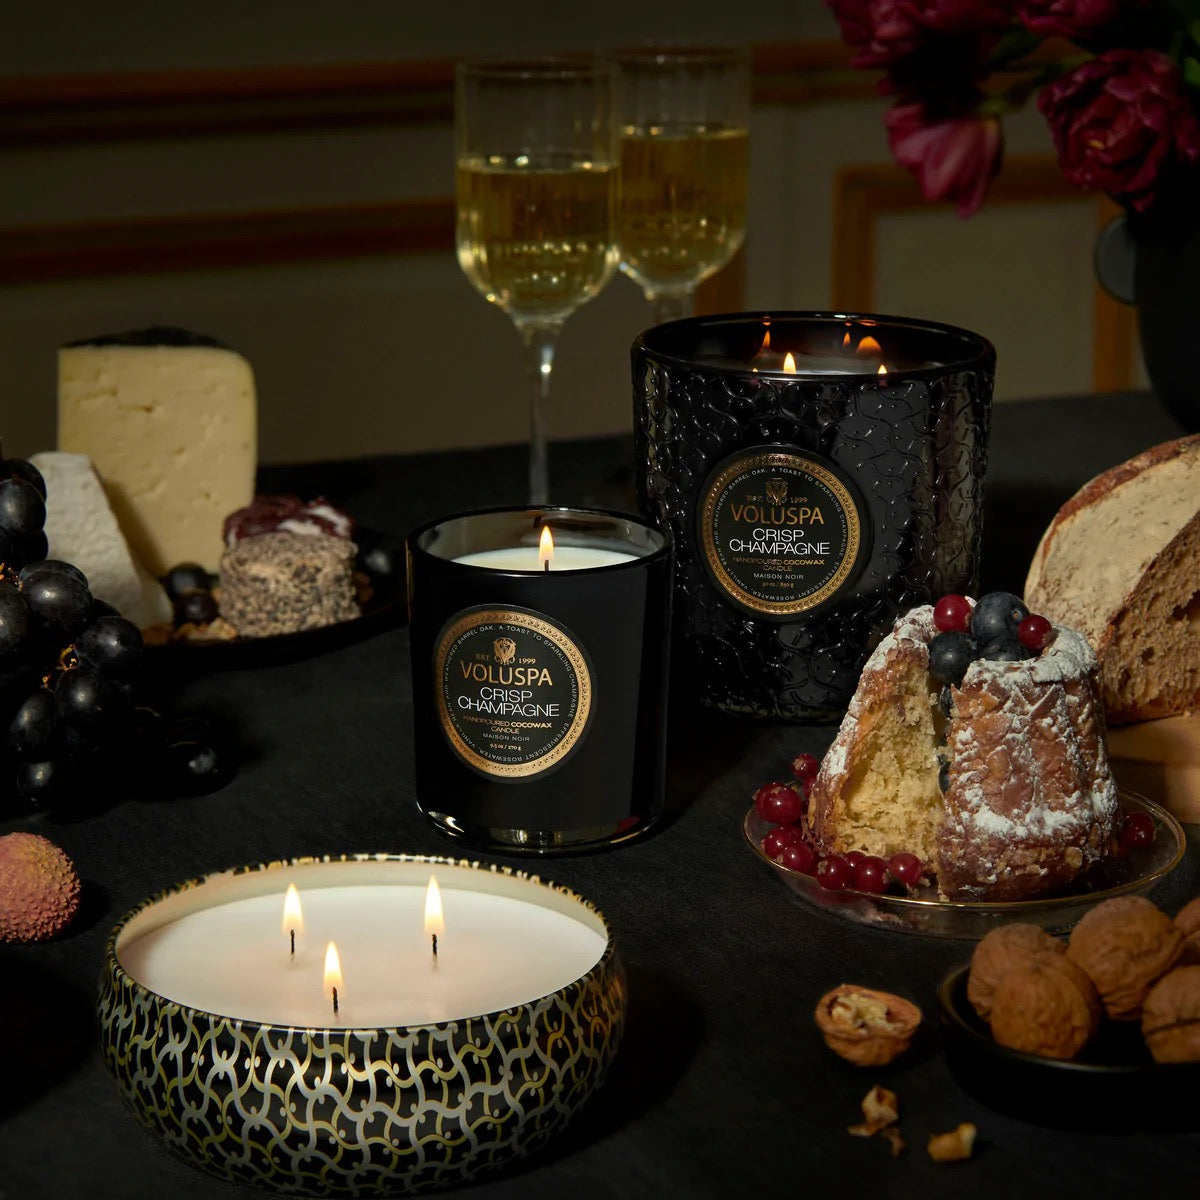 Classic Boxed Candle 269g - Crisp Champagne